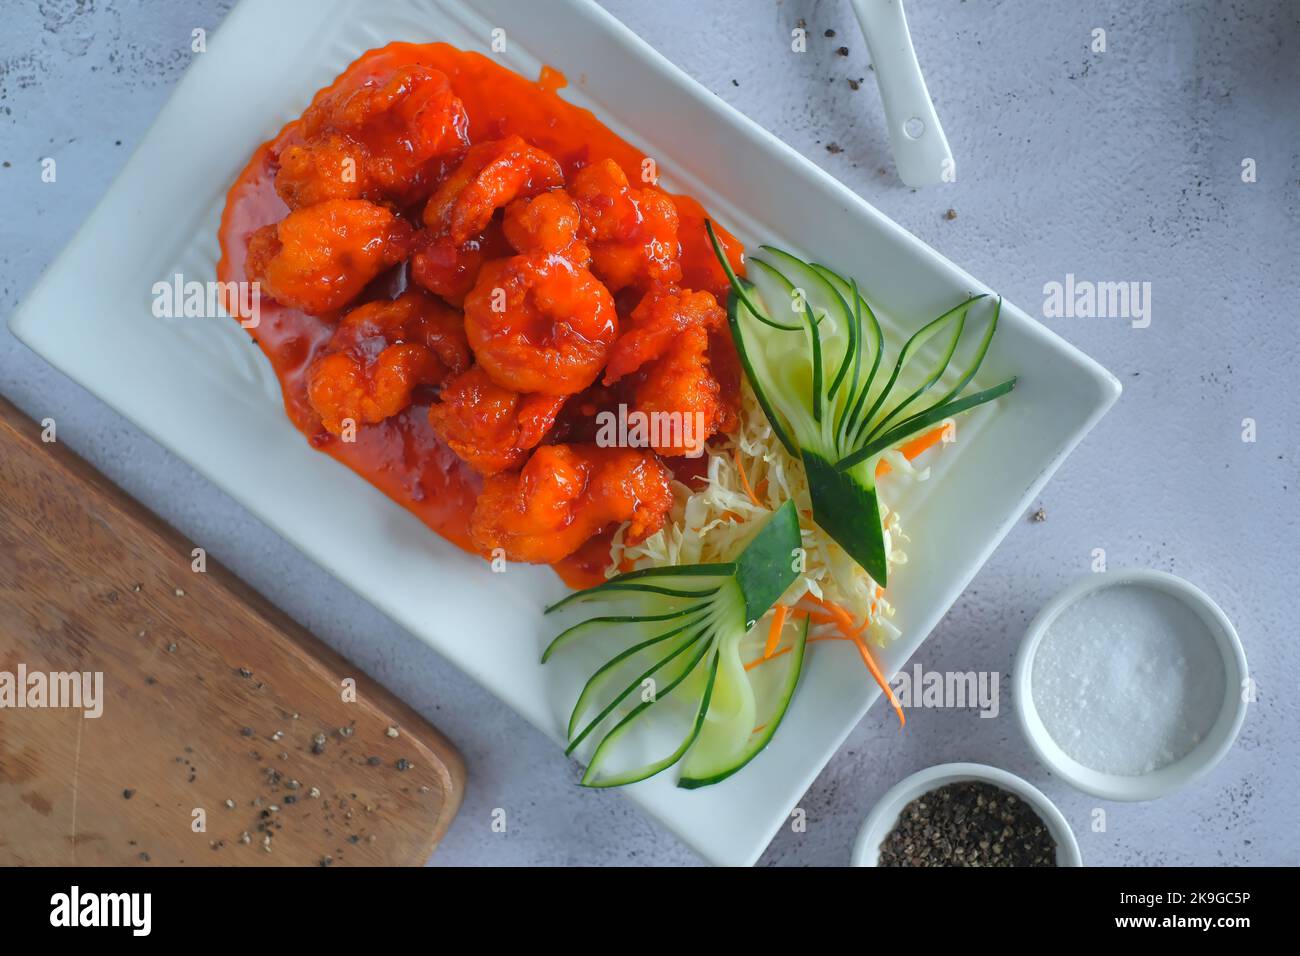 sweet and sour presented beautifully on a white plate Stock Photo